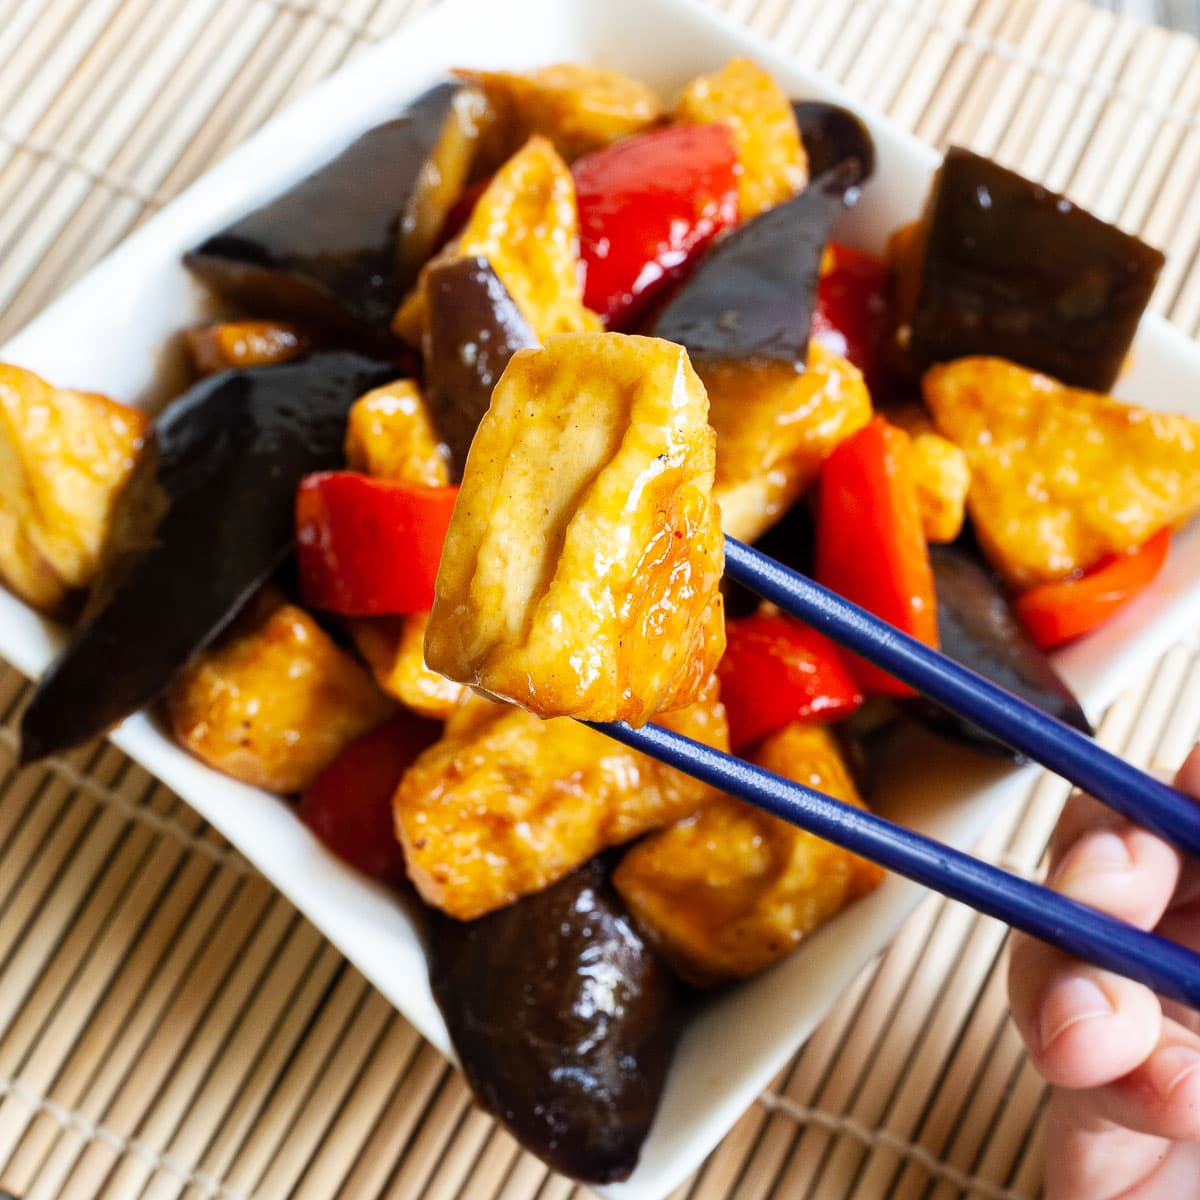 White rectangular plate full of large purple eggplant chunks, puffy brown glazed tofu and red peppers. Blue chopsticks are taking one tofu piece and holding it up in the air.